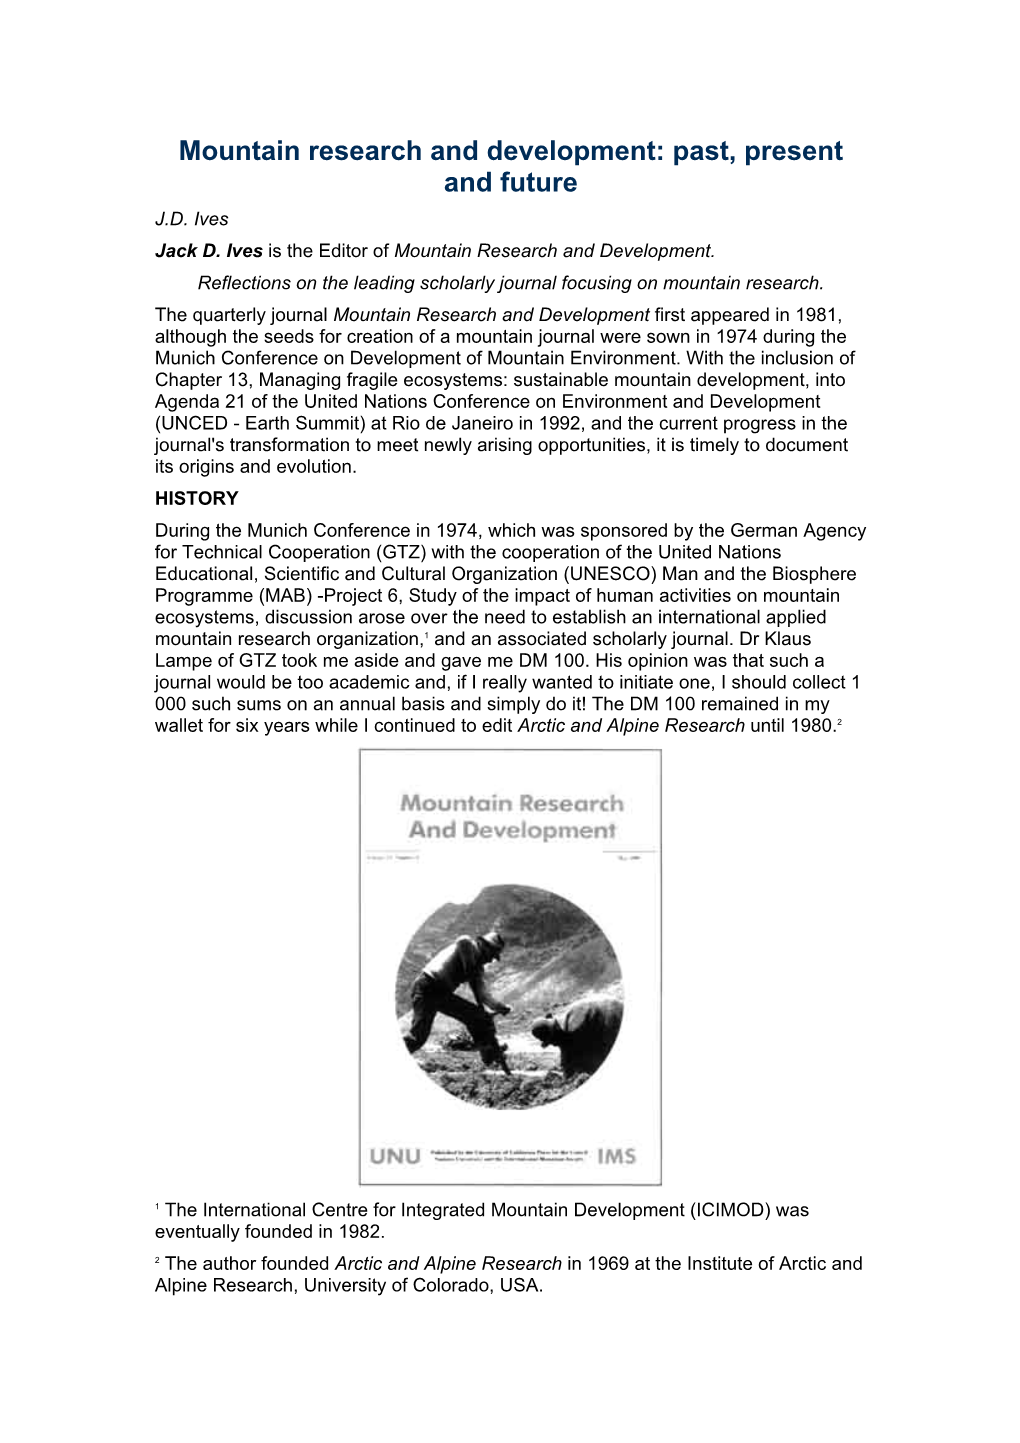 Mountain Research and Development: Past, Present and Future J.D